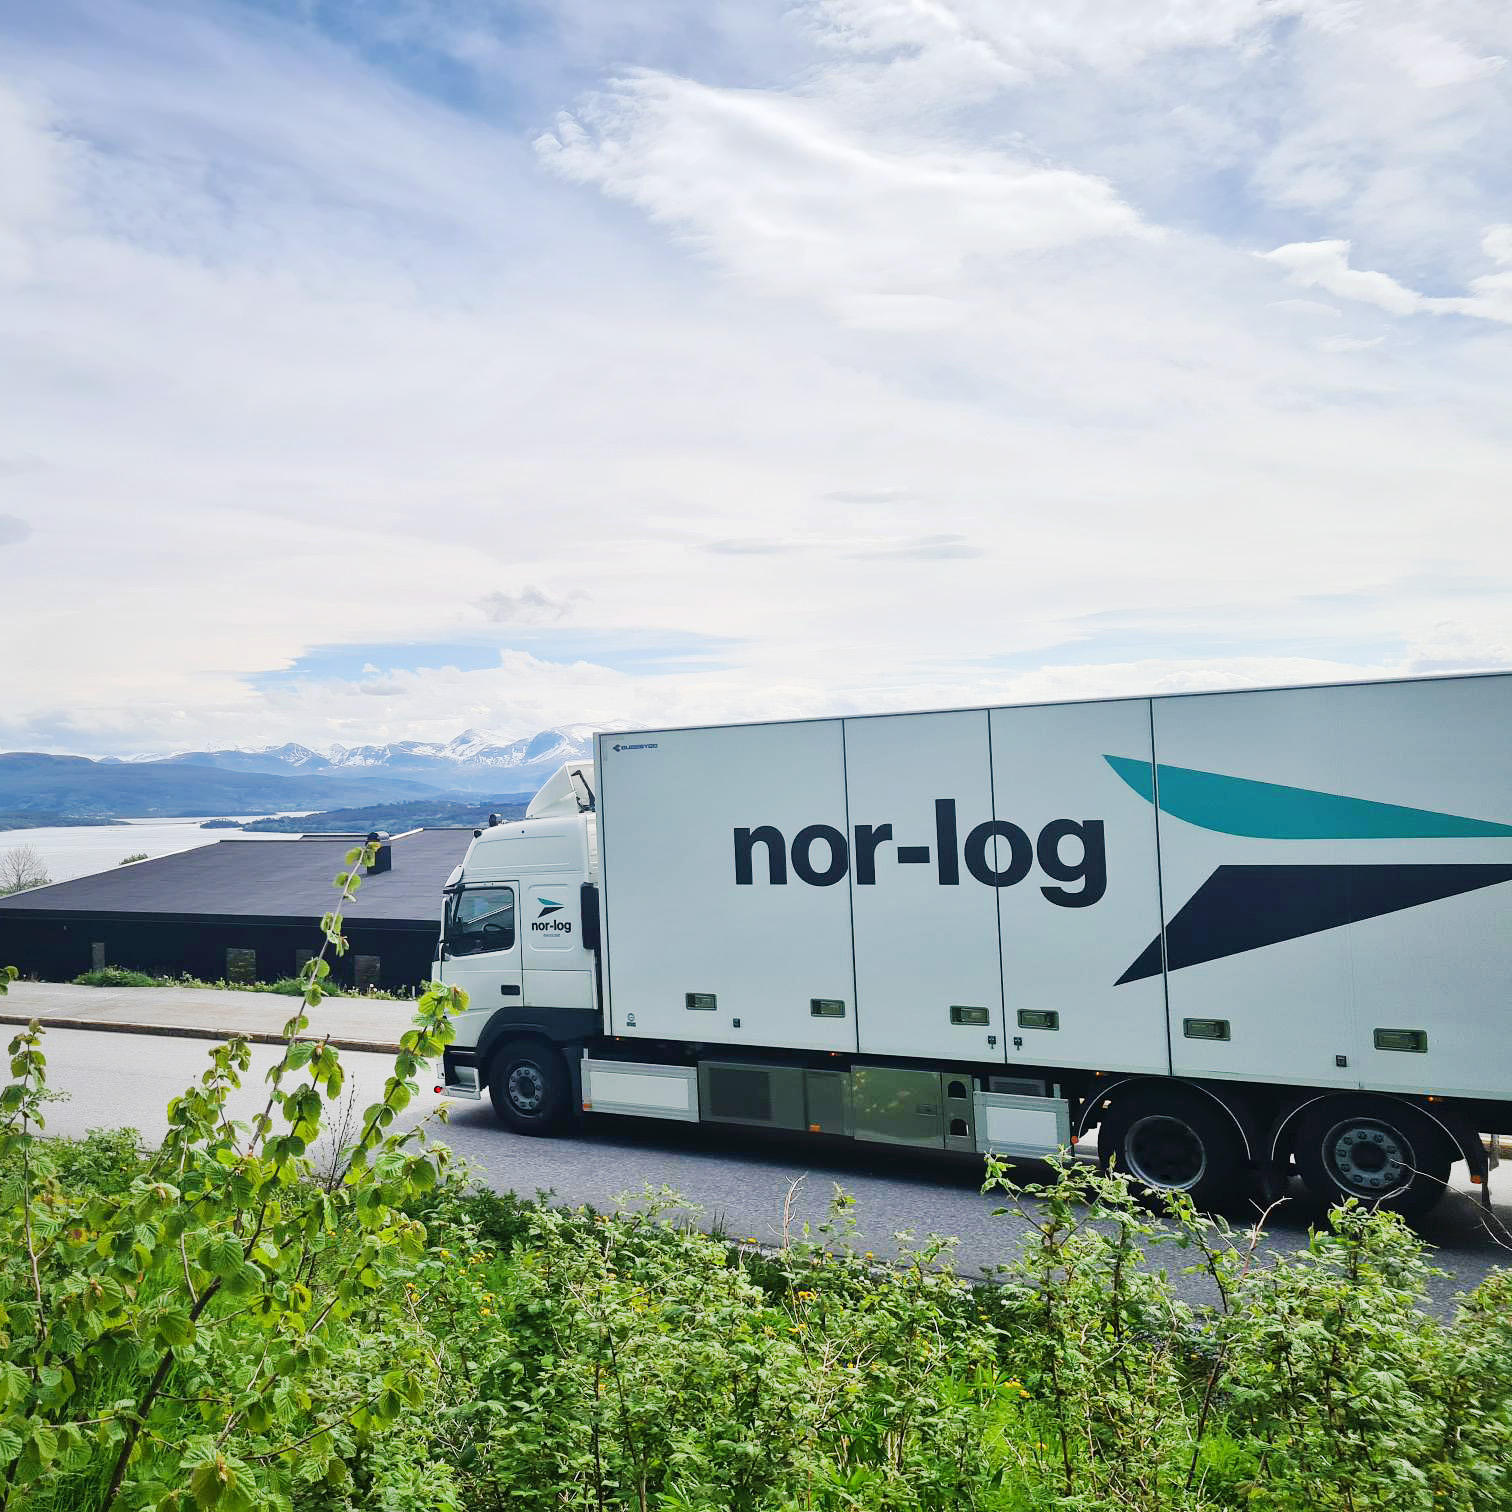 Nor-log truck on road